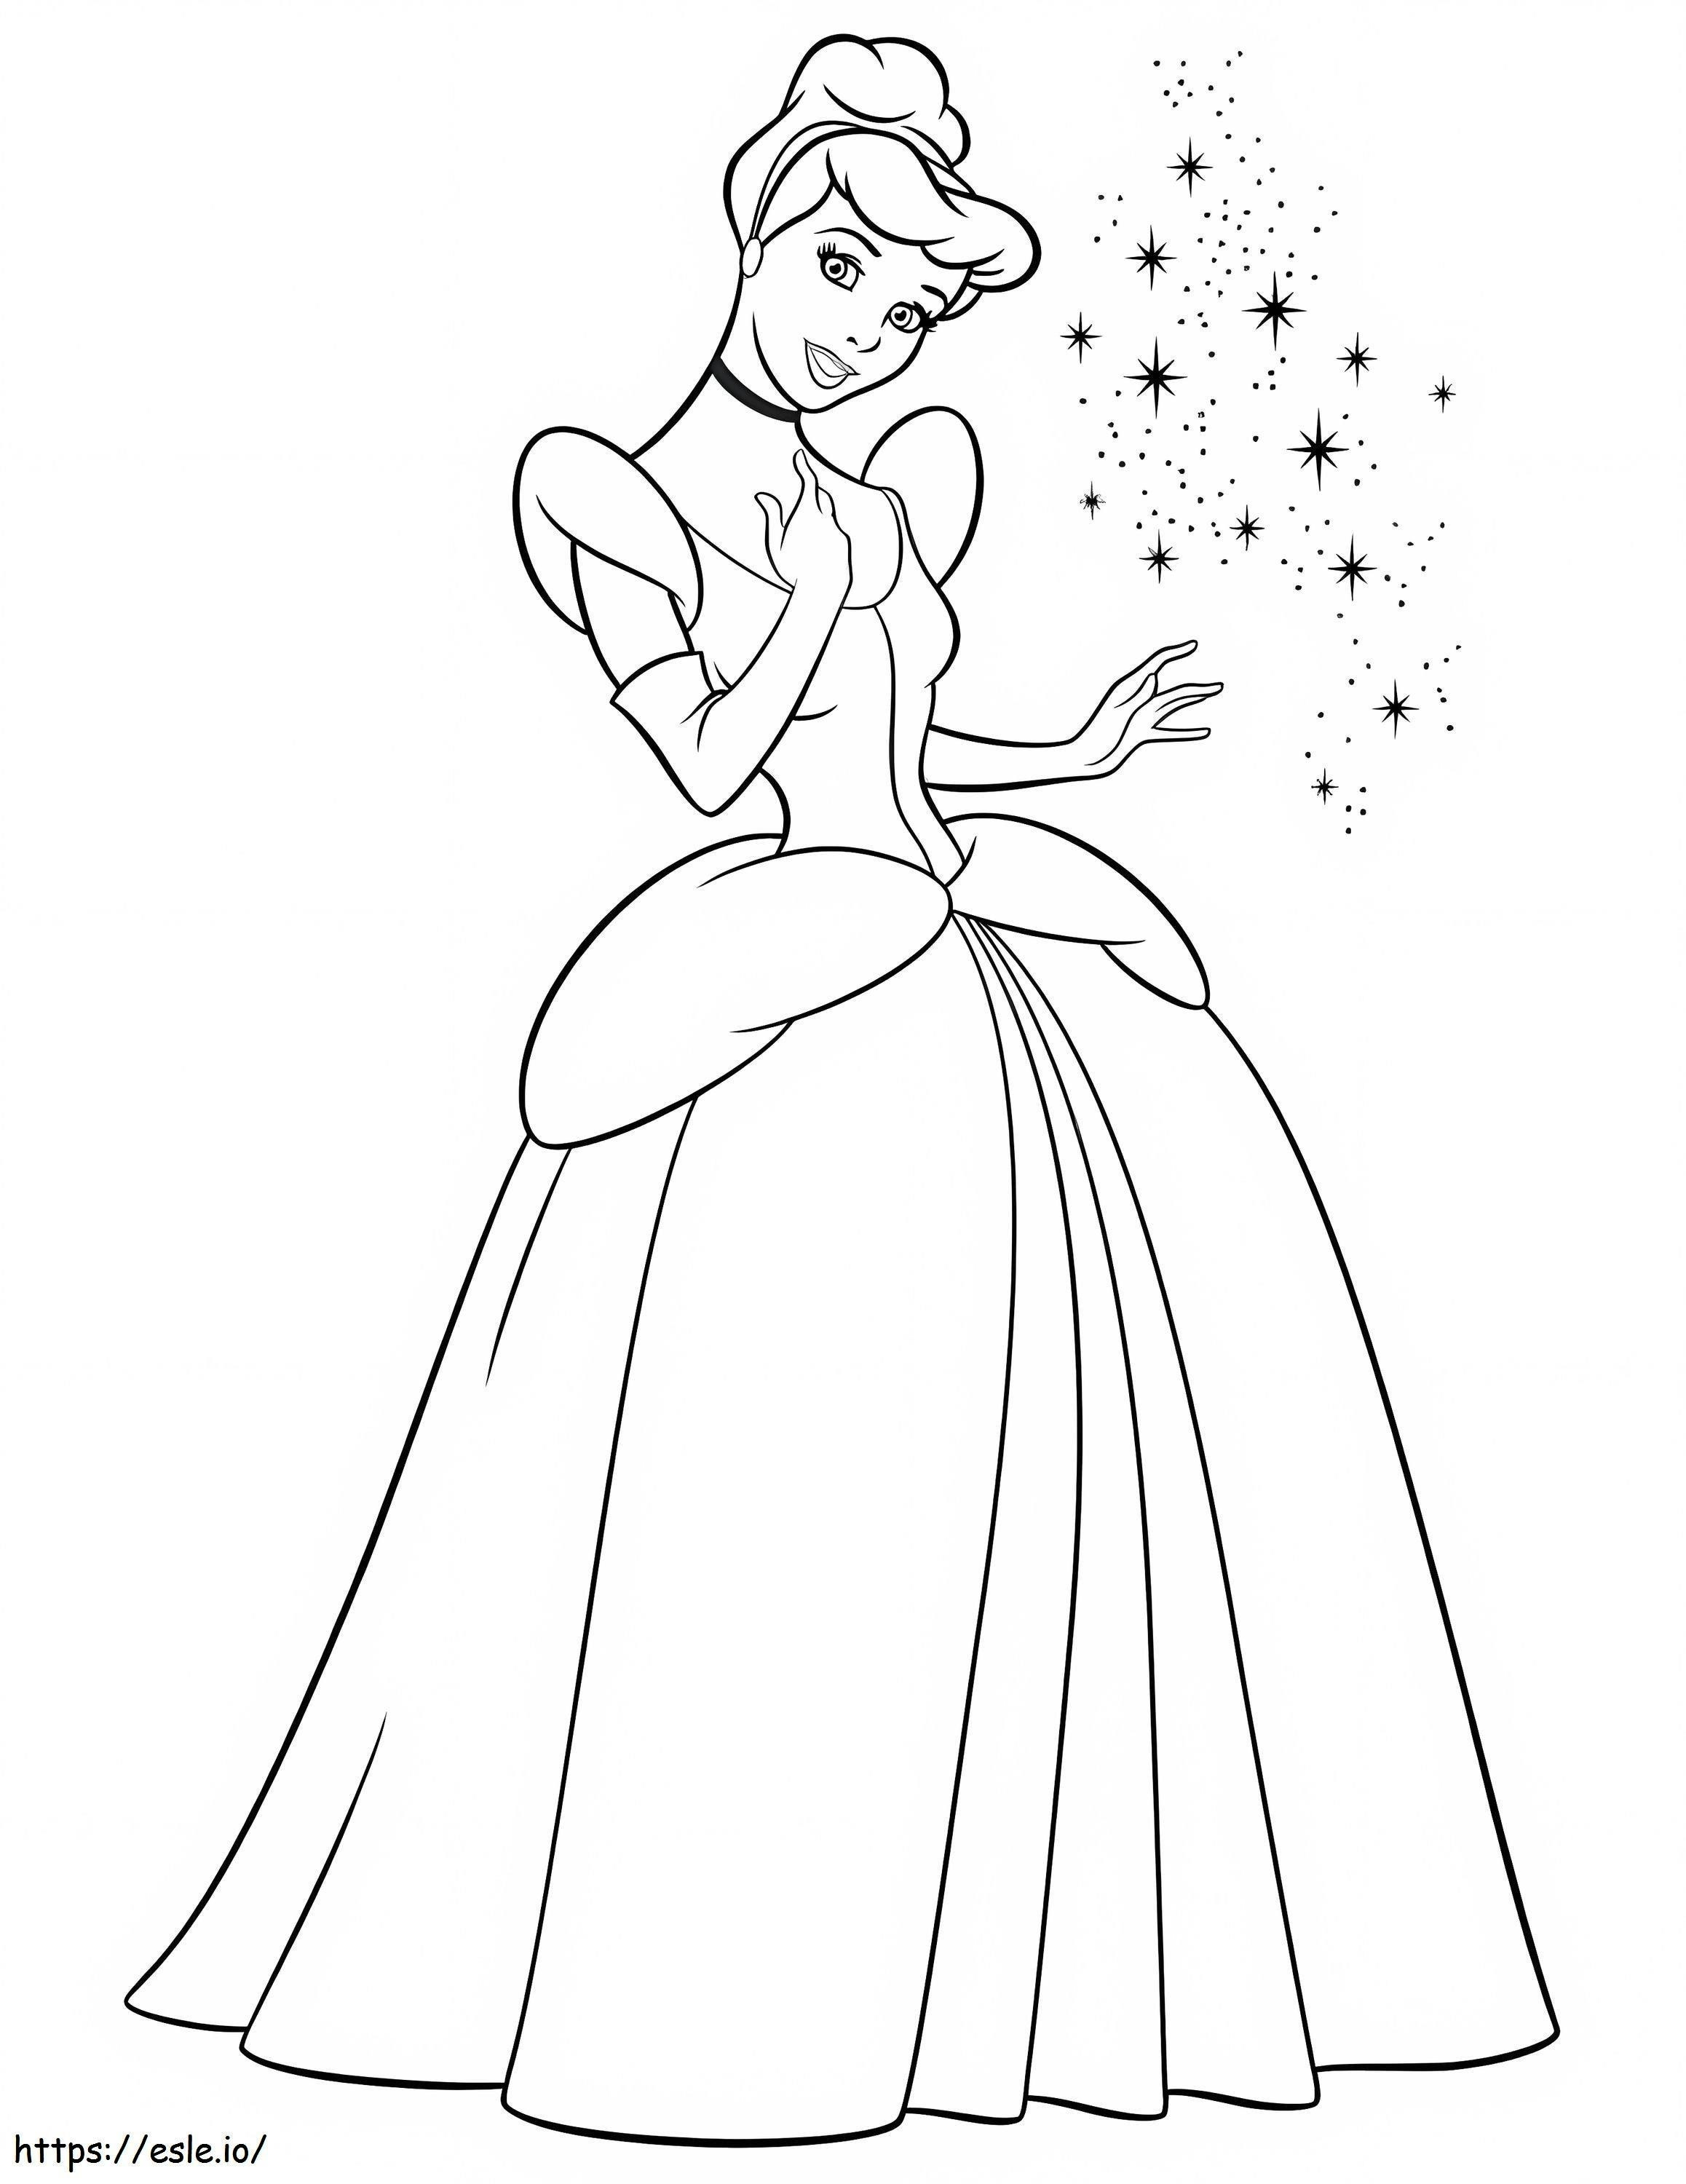 Well Cinderella coloring page